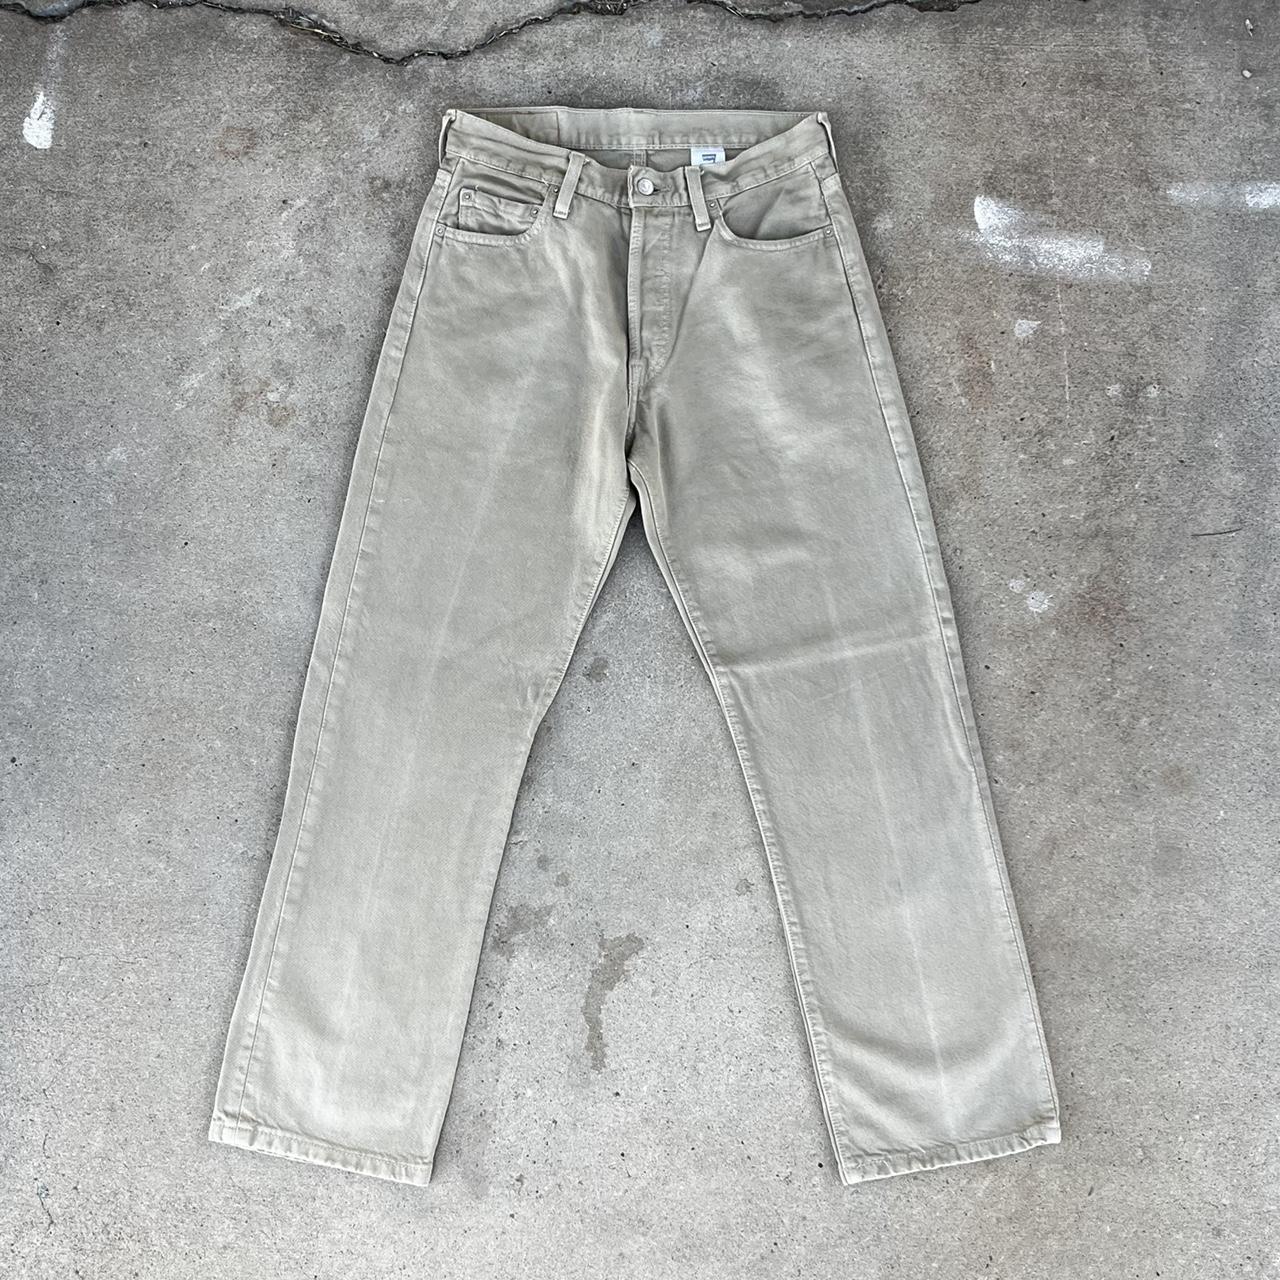 2006 Tan Levi's 501 Jeans -Crease Fade Up Either... - Depop